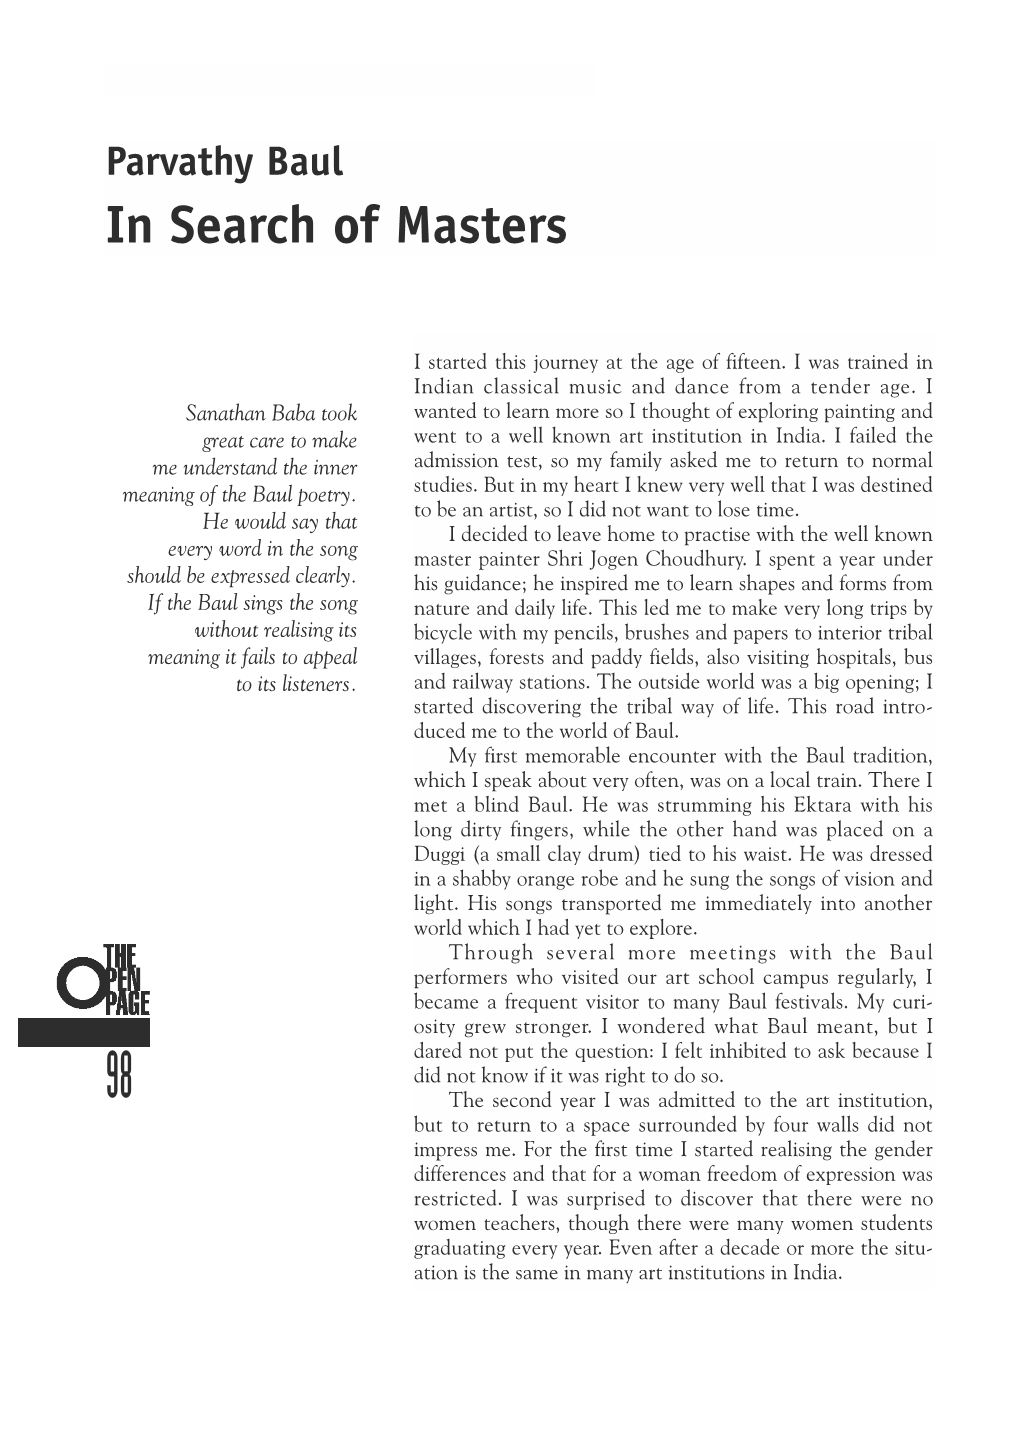 In Search of Masters